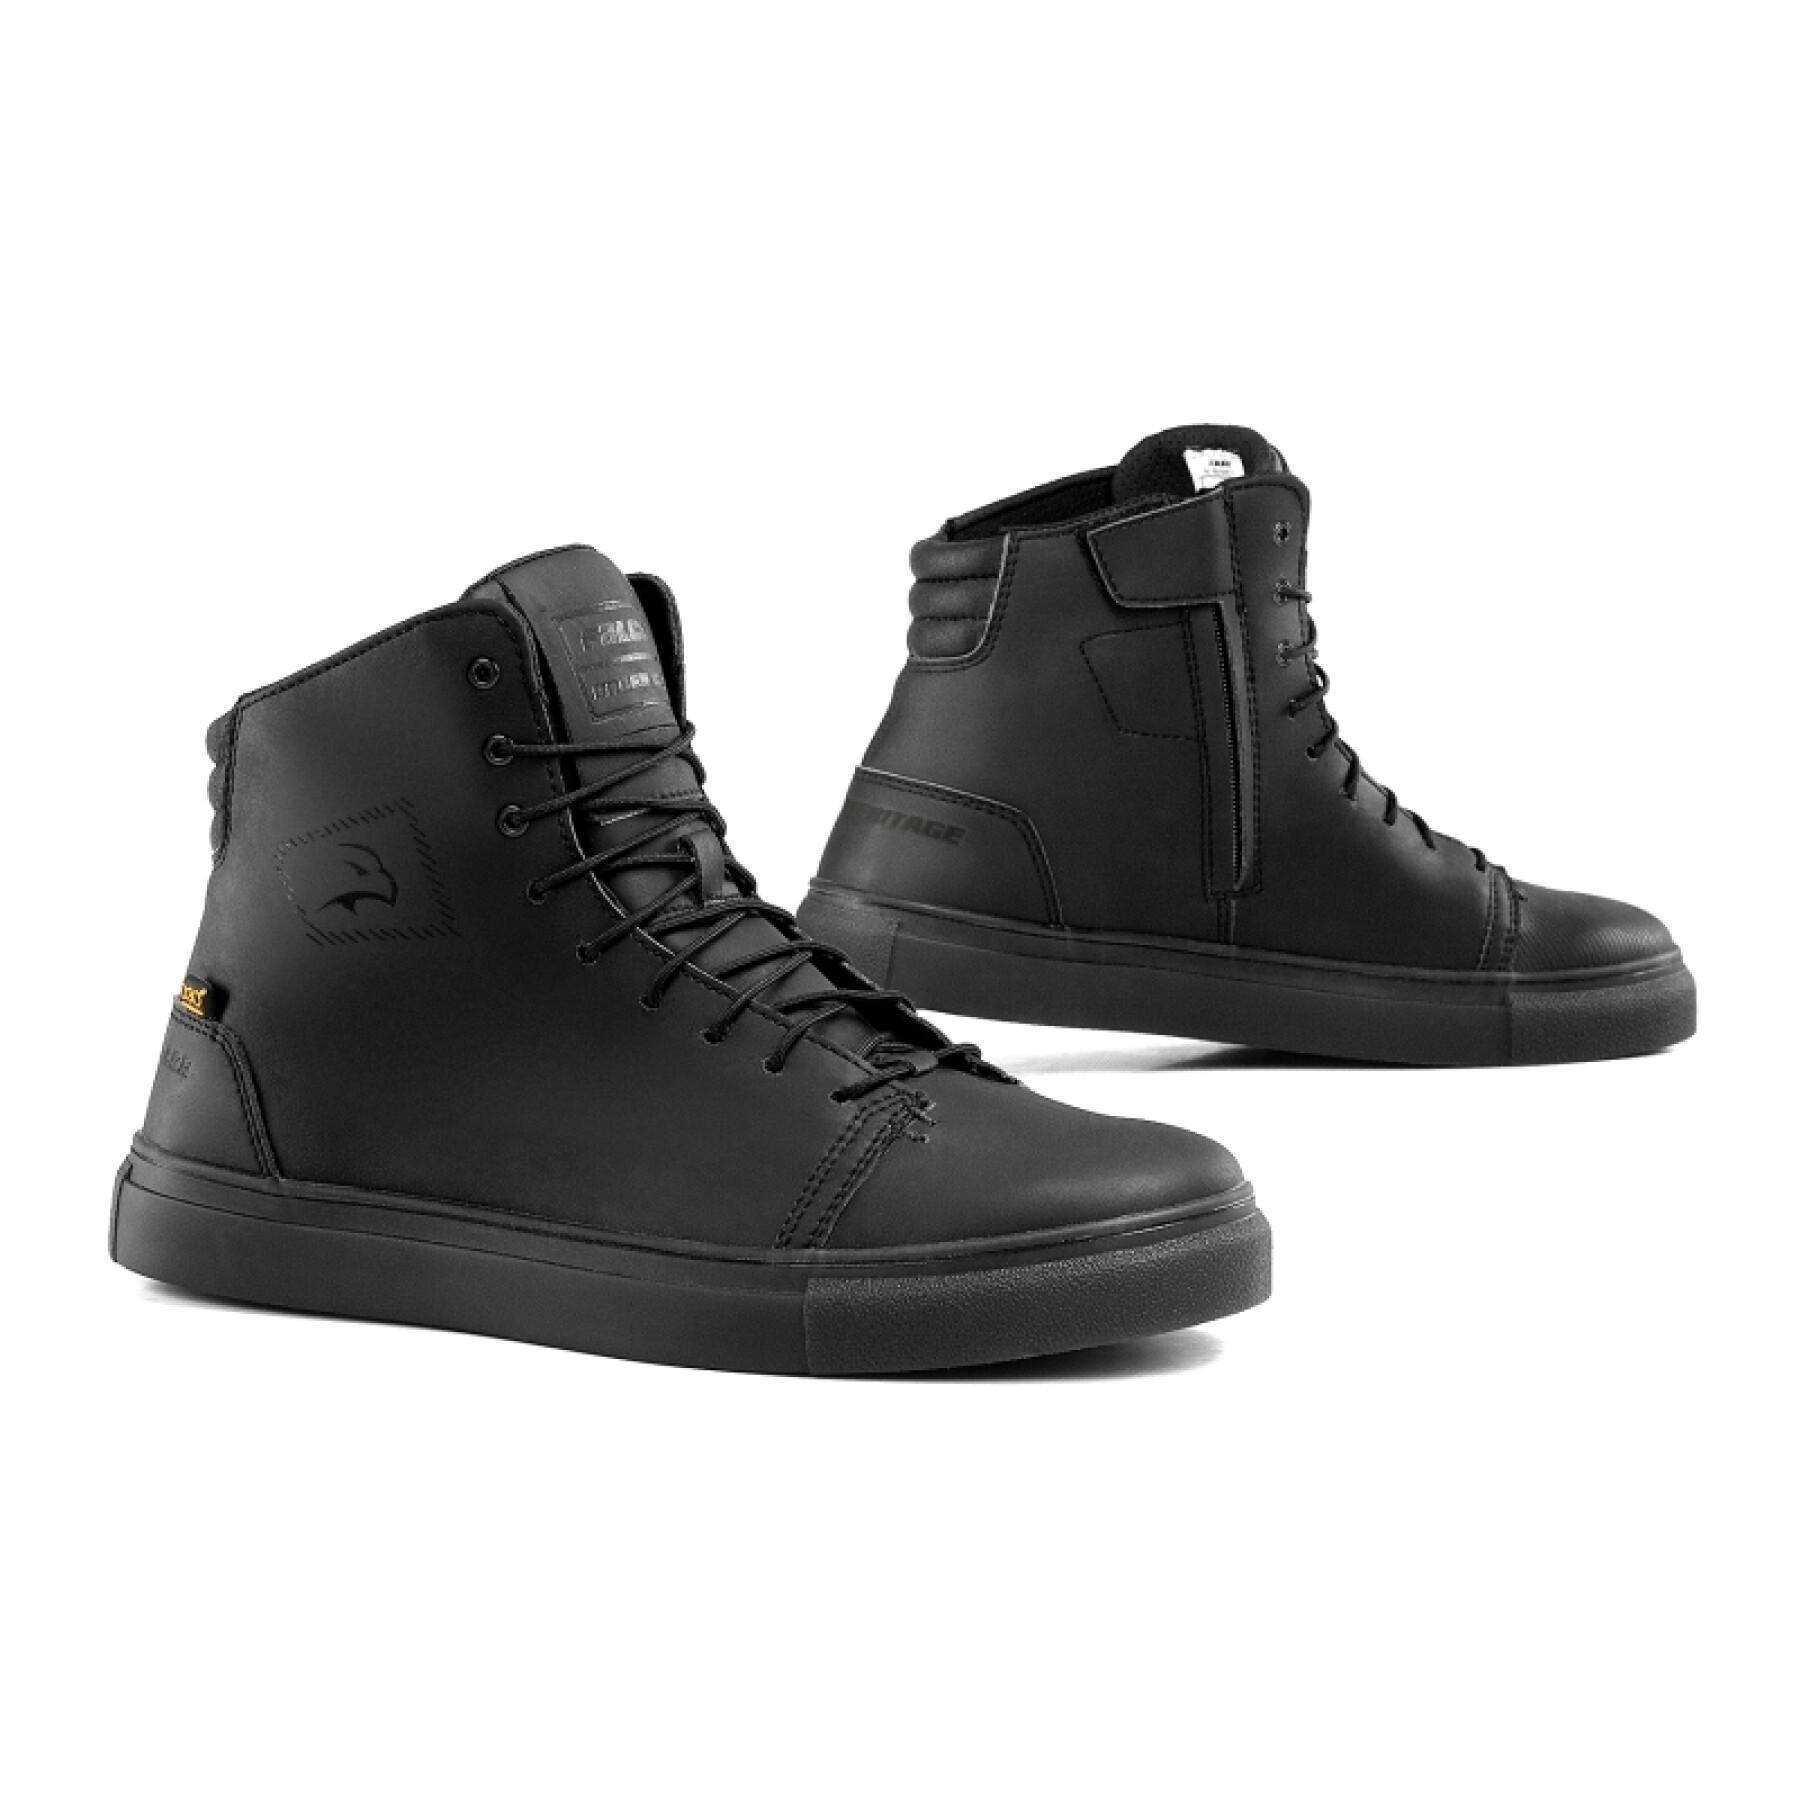 Chaussures moto Falco Nomad 2